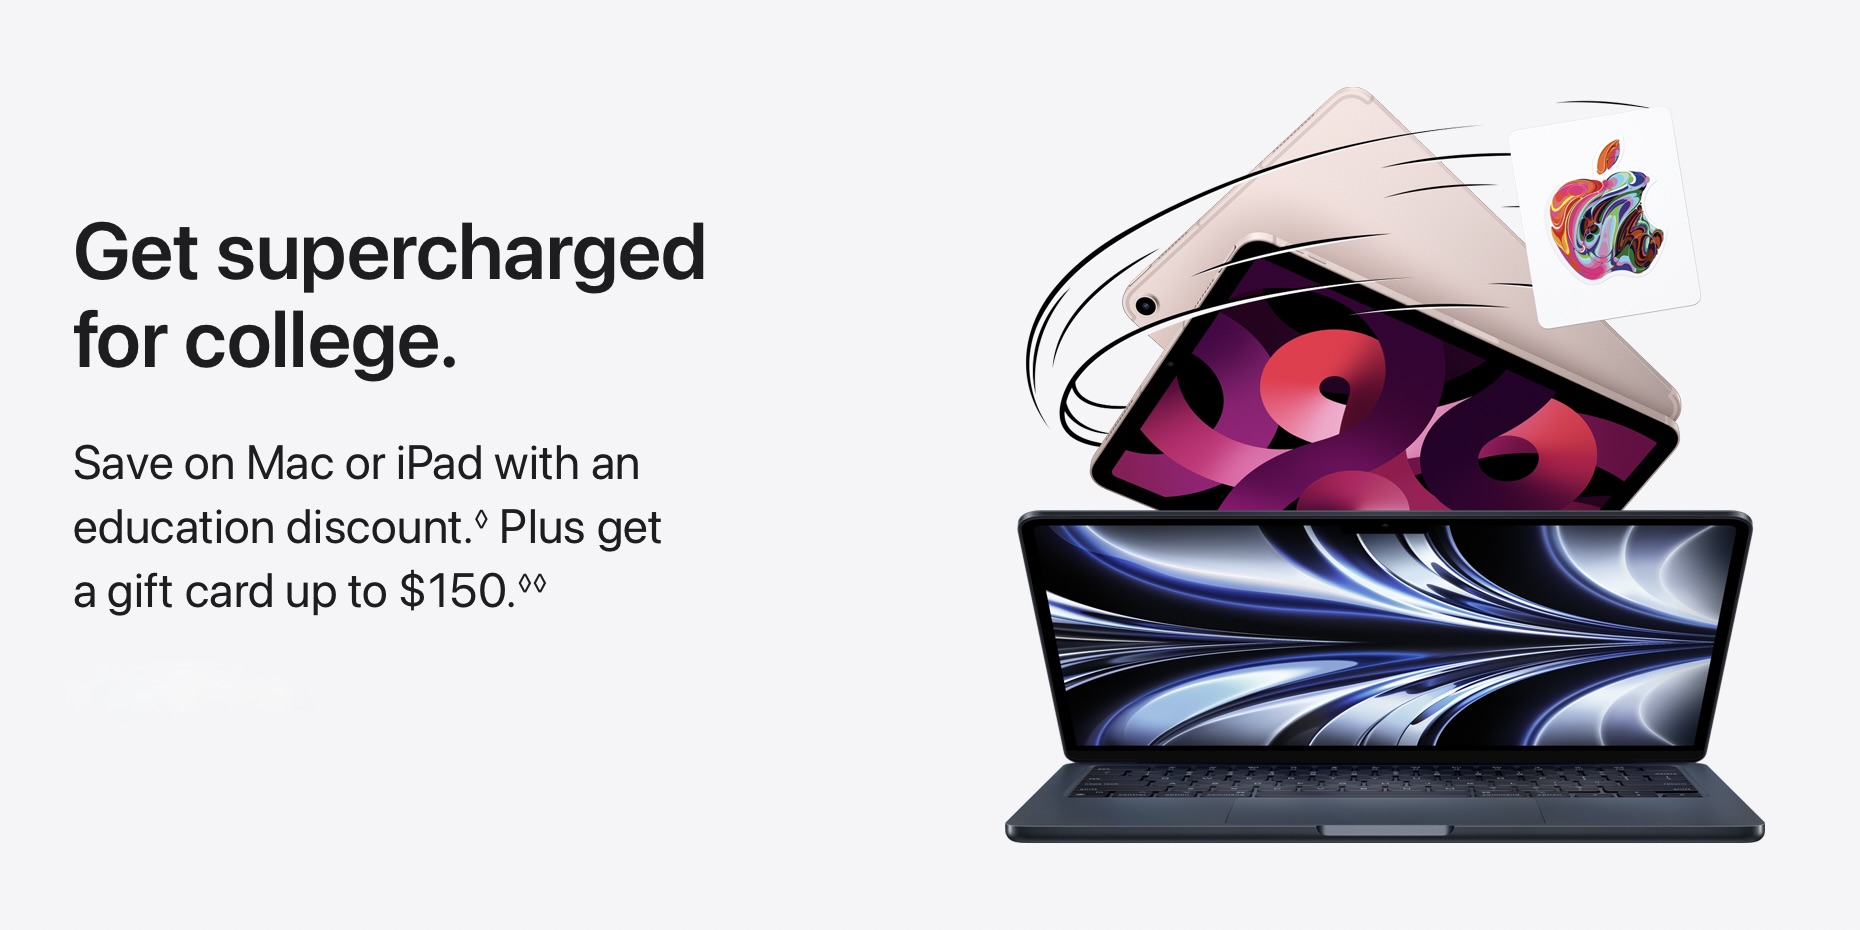 Apple kicks off Back to School promo with $150 gift card - 9to5Mac